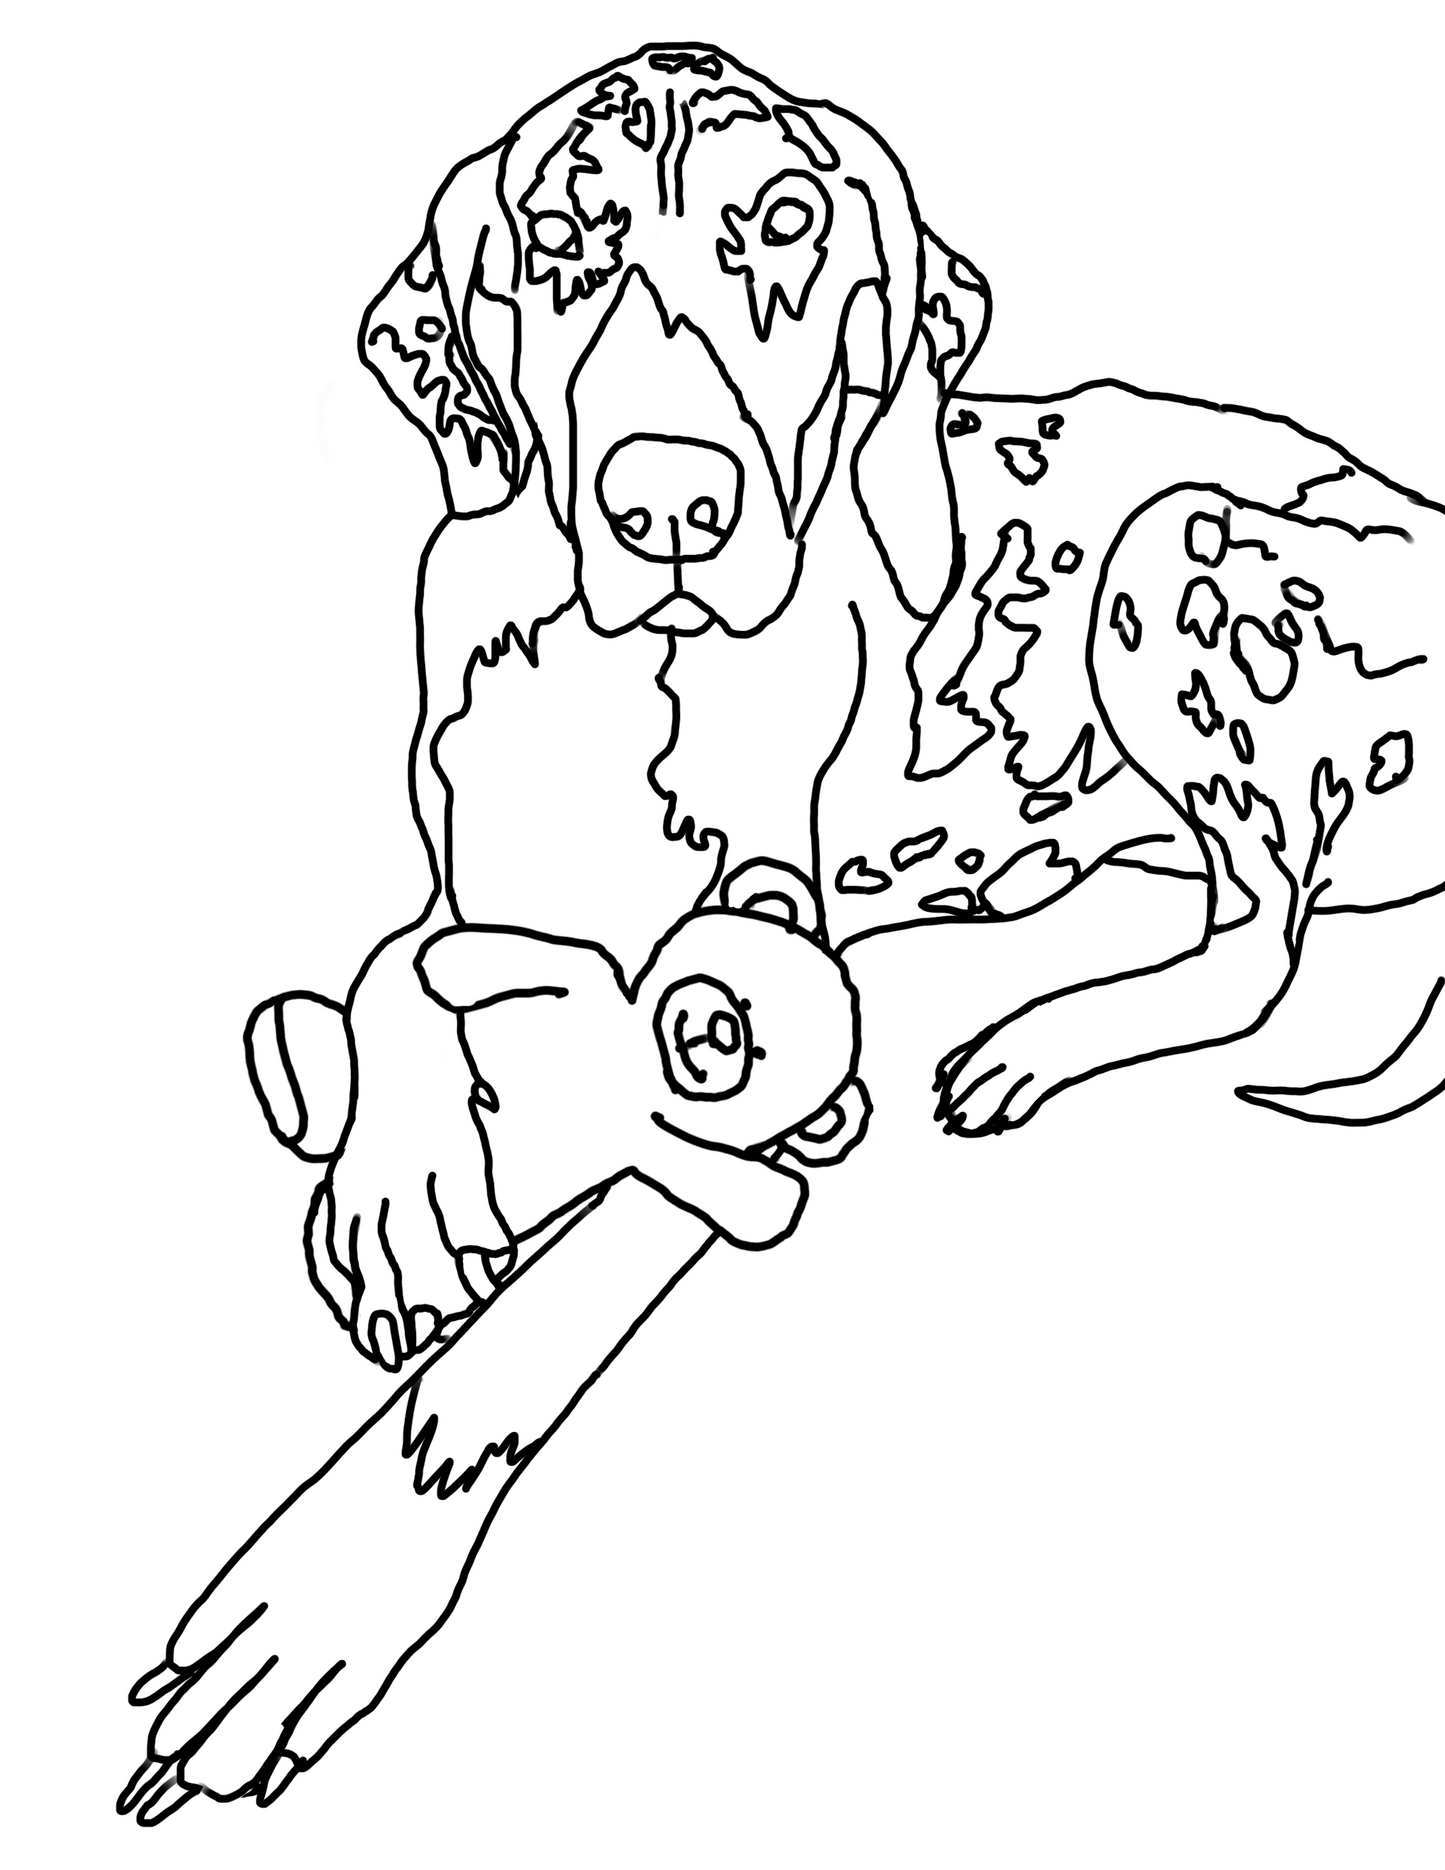 The Good Dog Coloring book